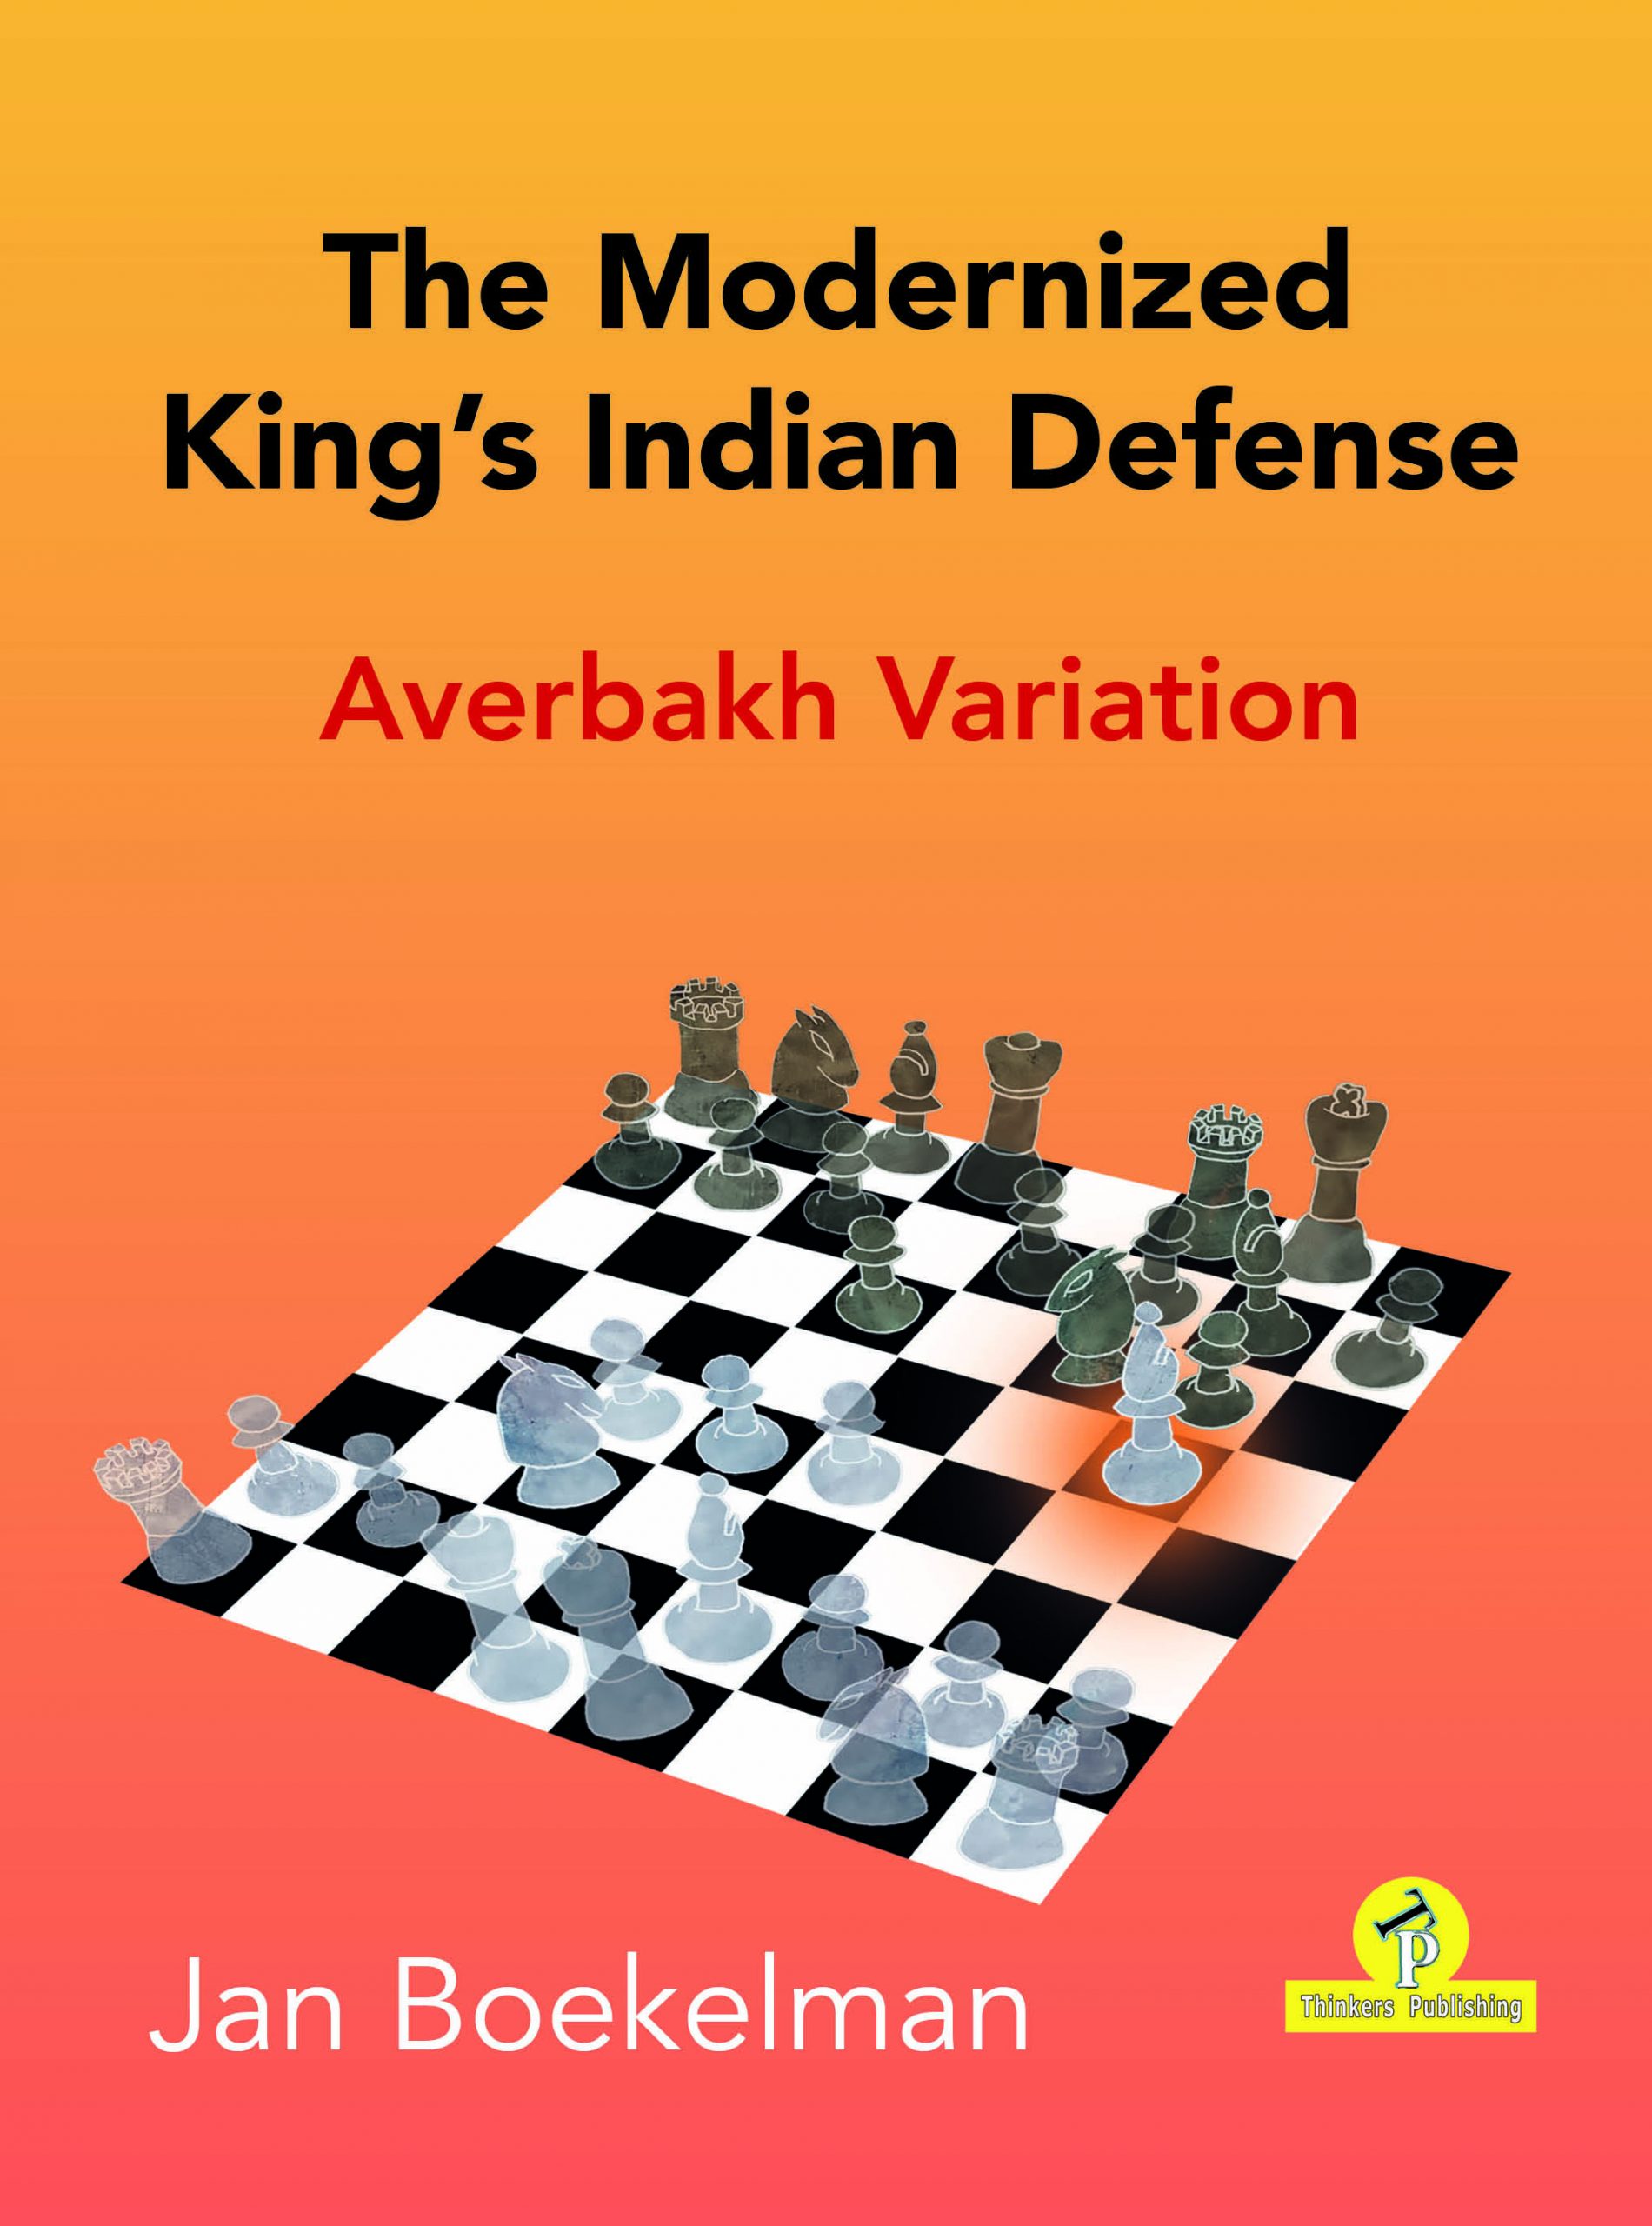 King's Indian Defense: Petrosian Variation - Chess Openings 